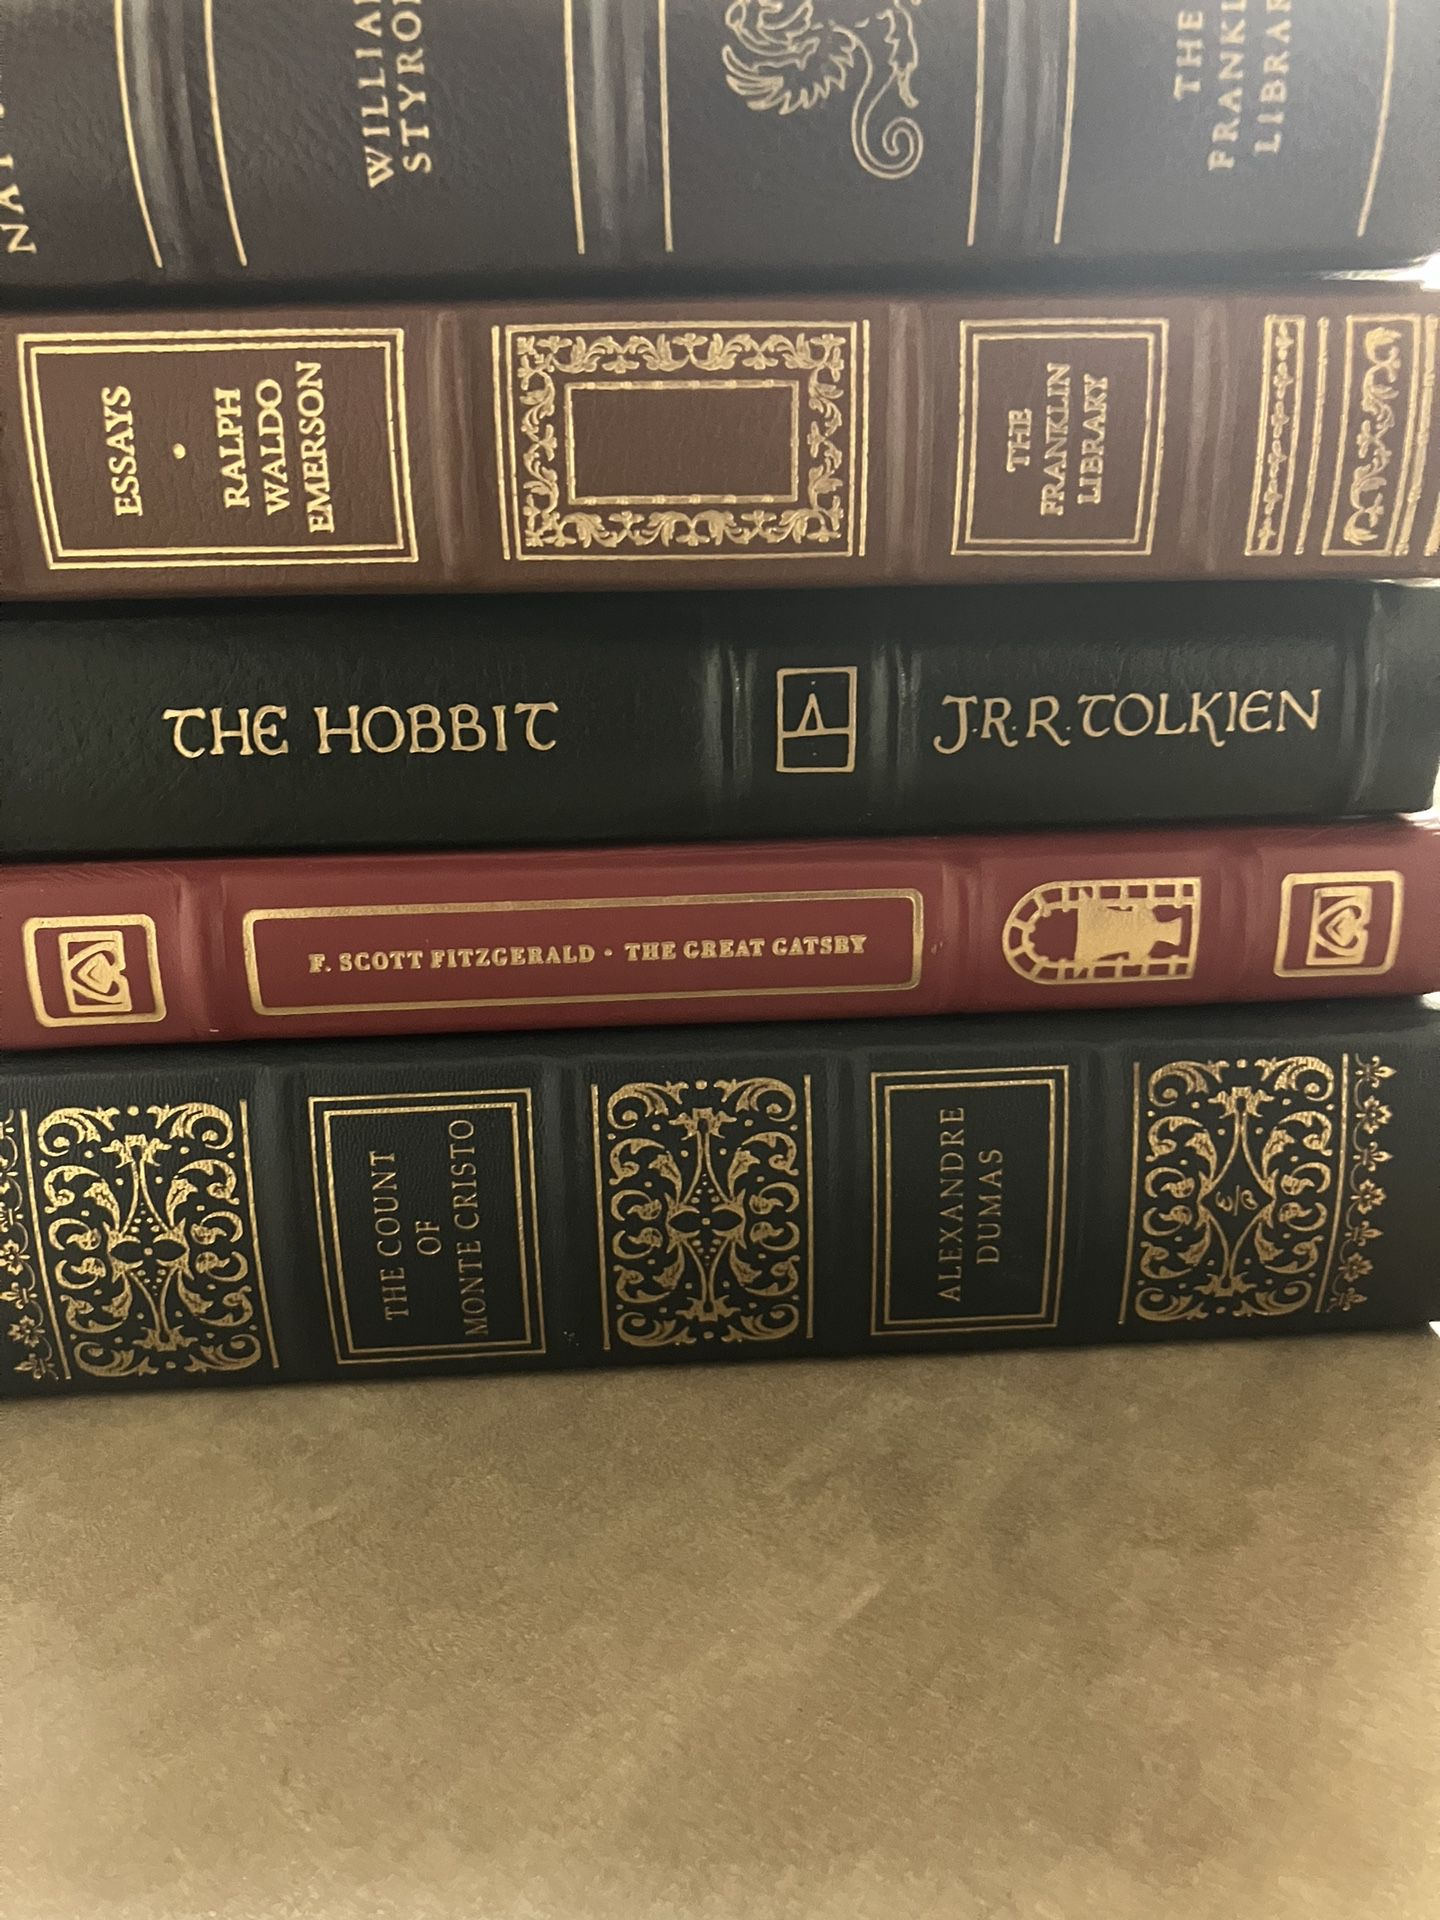 ⭐️Rare Books For Sale!!! (limited Edition) Classics All In One Haul